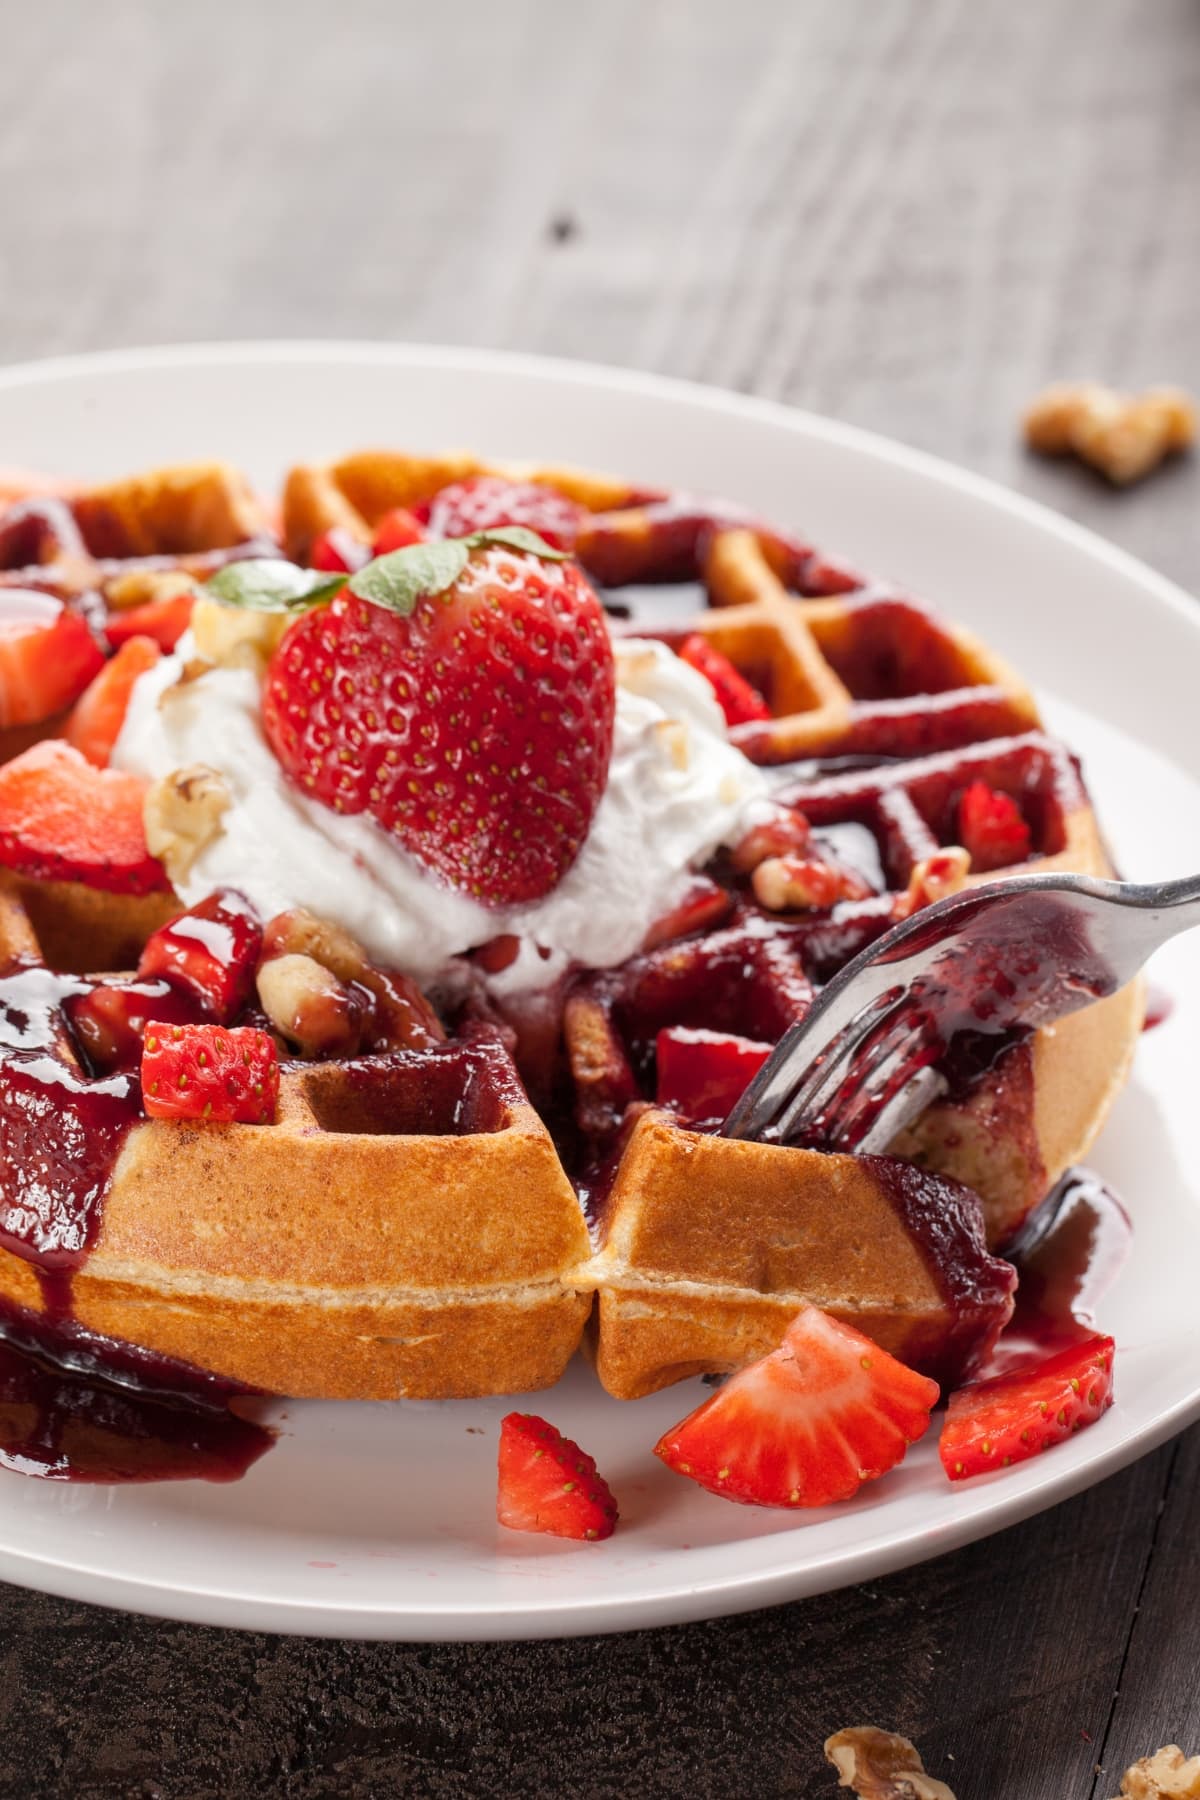 Belgian Waffle Topped With Berries, Nuts and Syrup